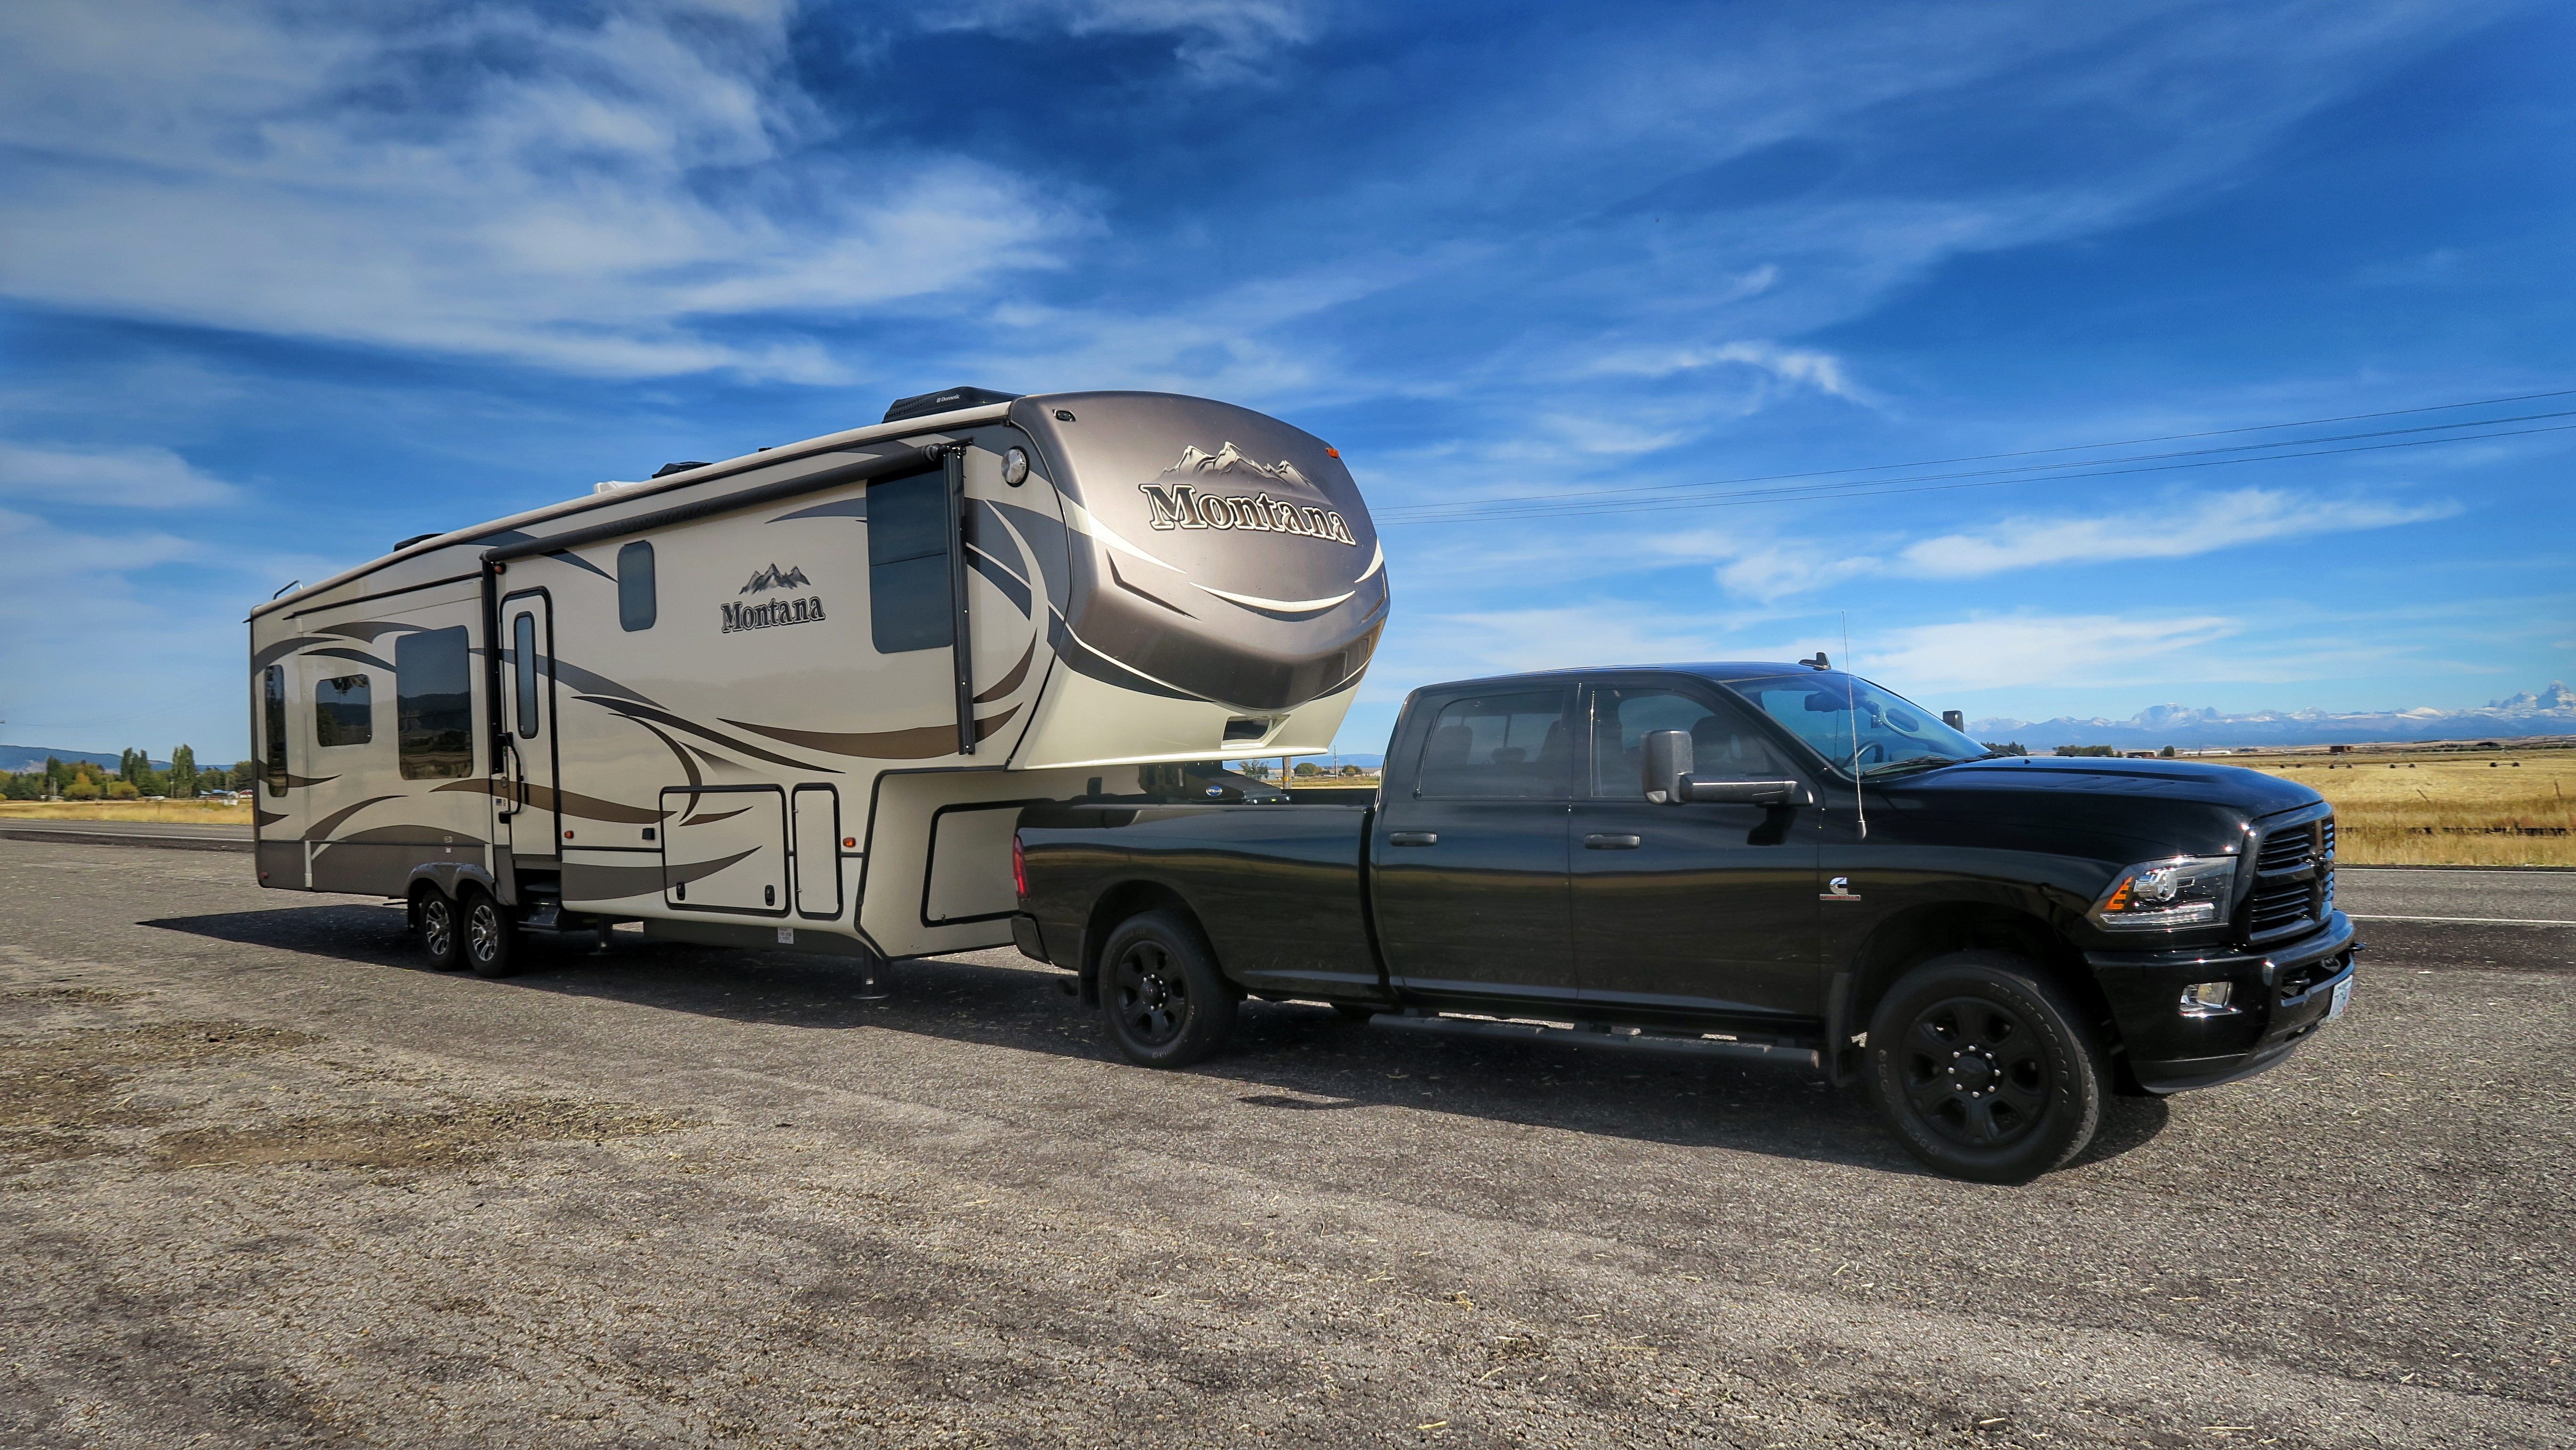 Choosing RV Type and Size